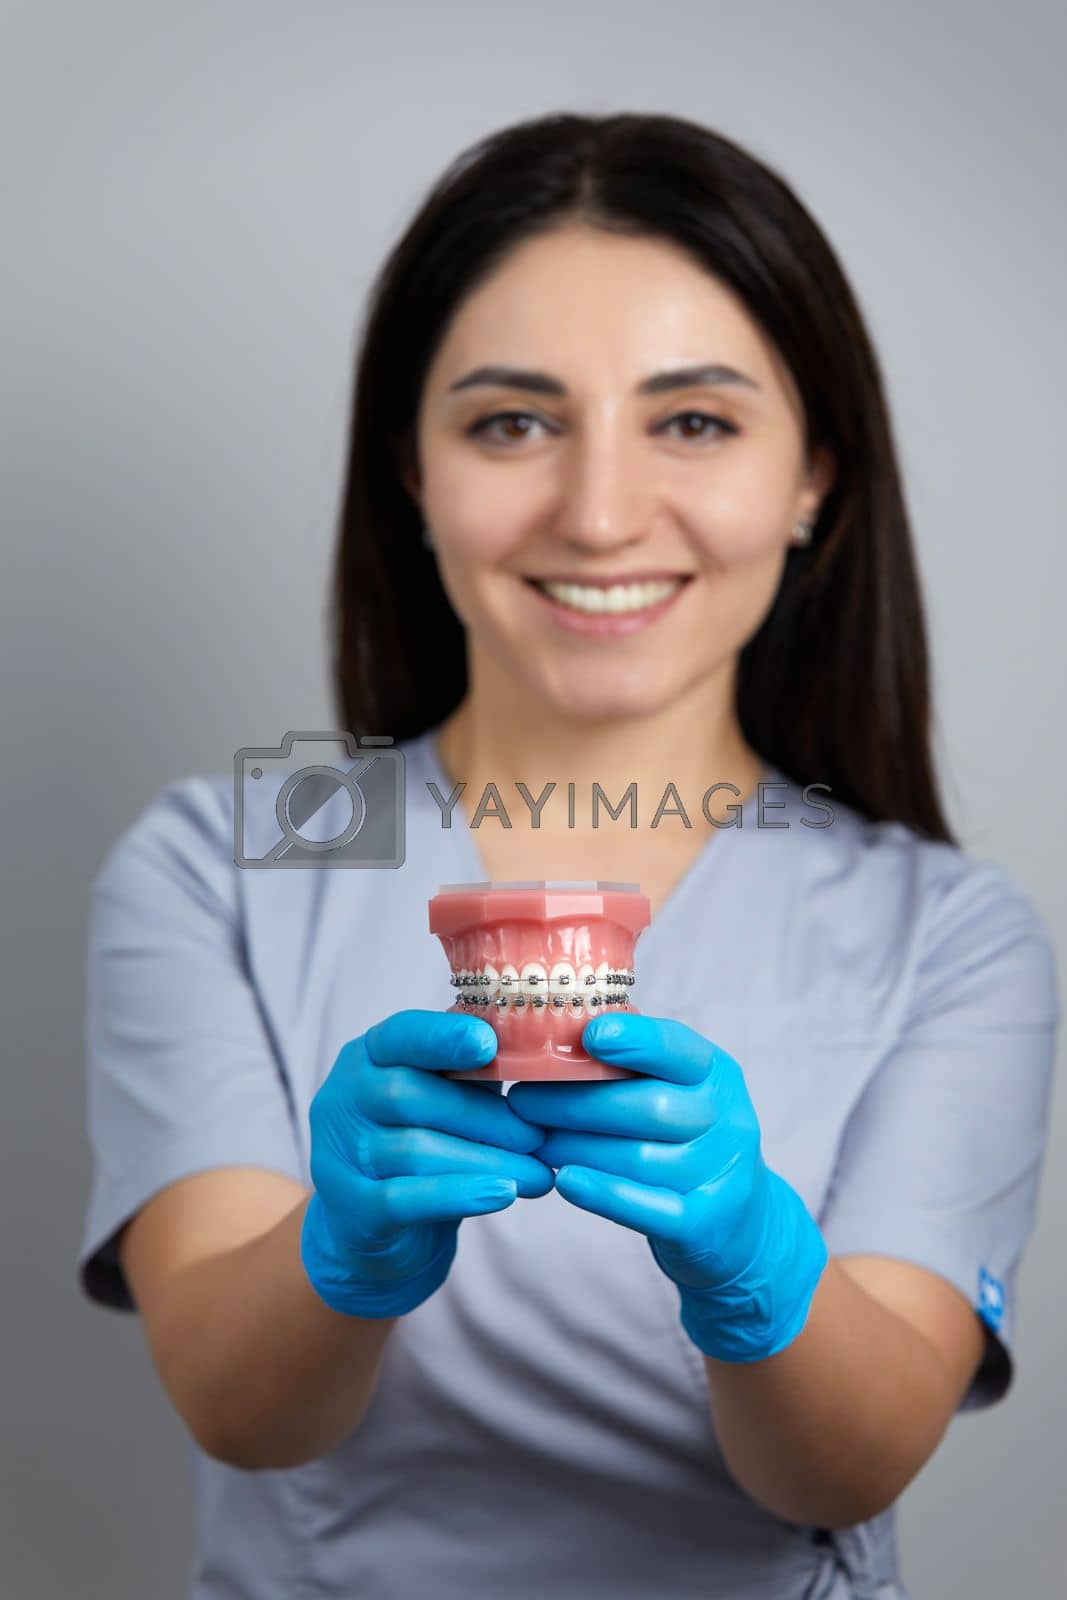 Royalty free image of Doctor orthodontist showing model of human jaw with wire braces attached by Mariakray